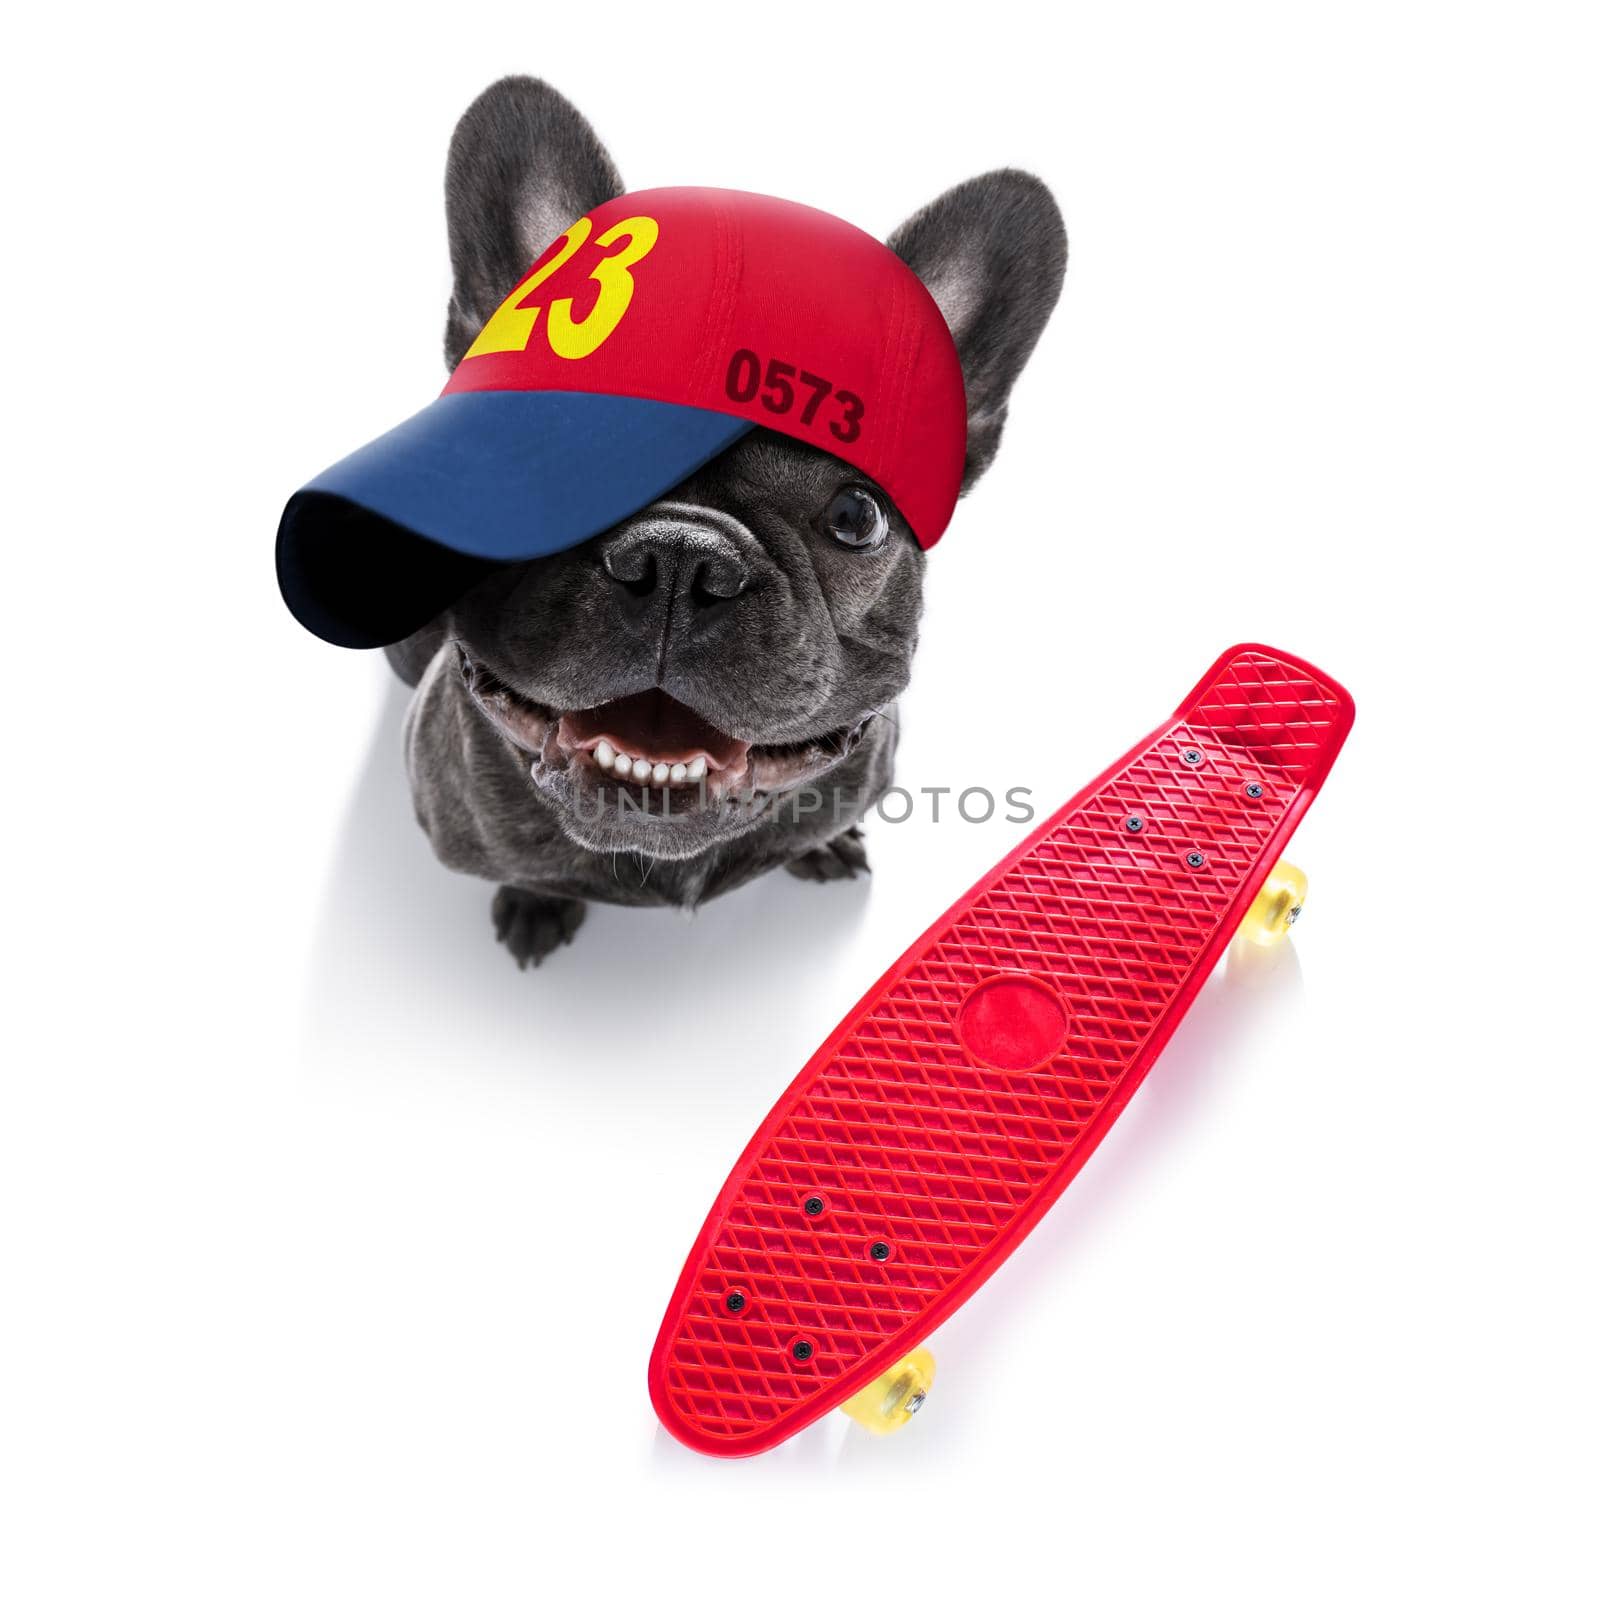 cool casual look french bulldog dog wearing a baseball cap or hat , sporty and fit , isolated on white background on a skateboard